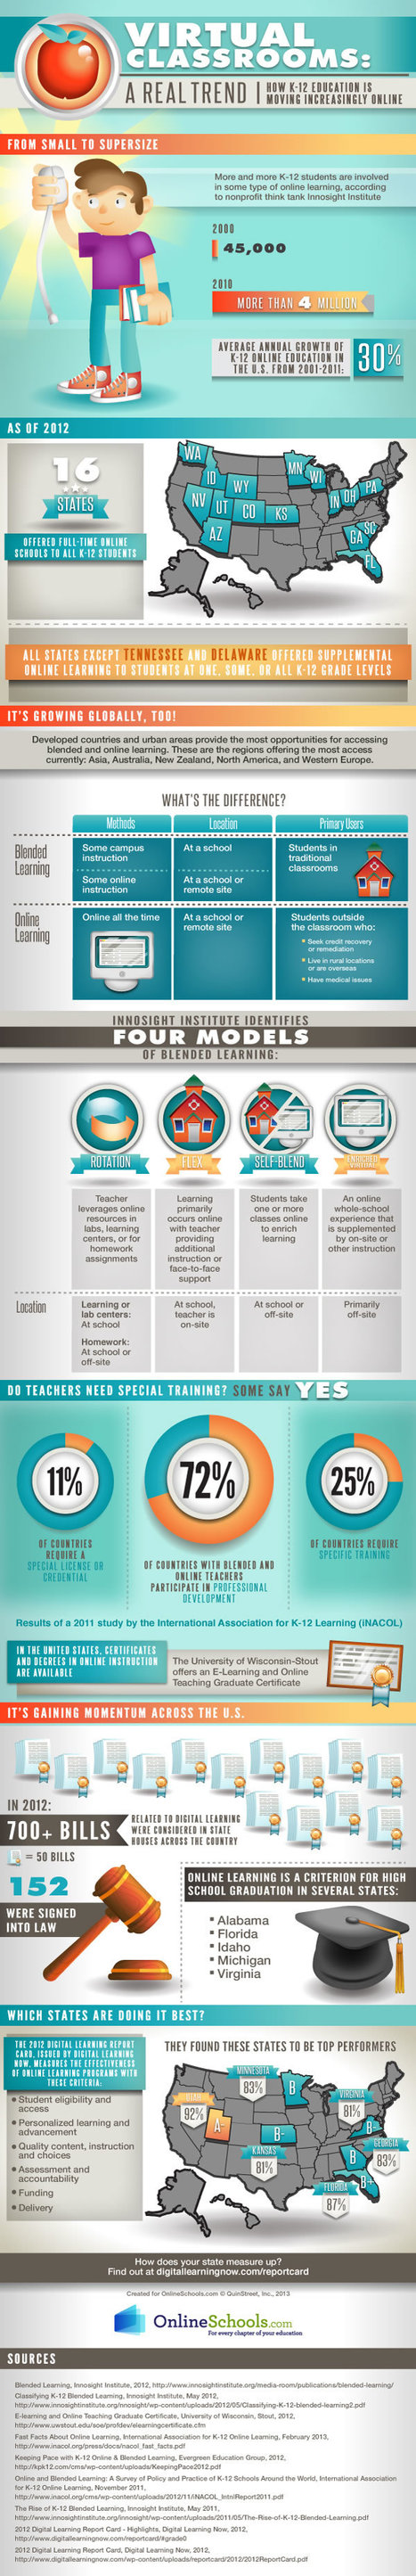 The Teacher's Quick Guide To Blended Learning [Infographic] | Education & Numérique | Scoop.it